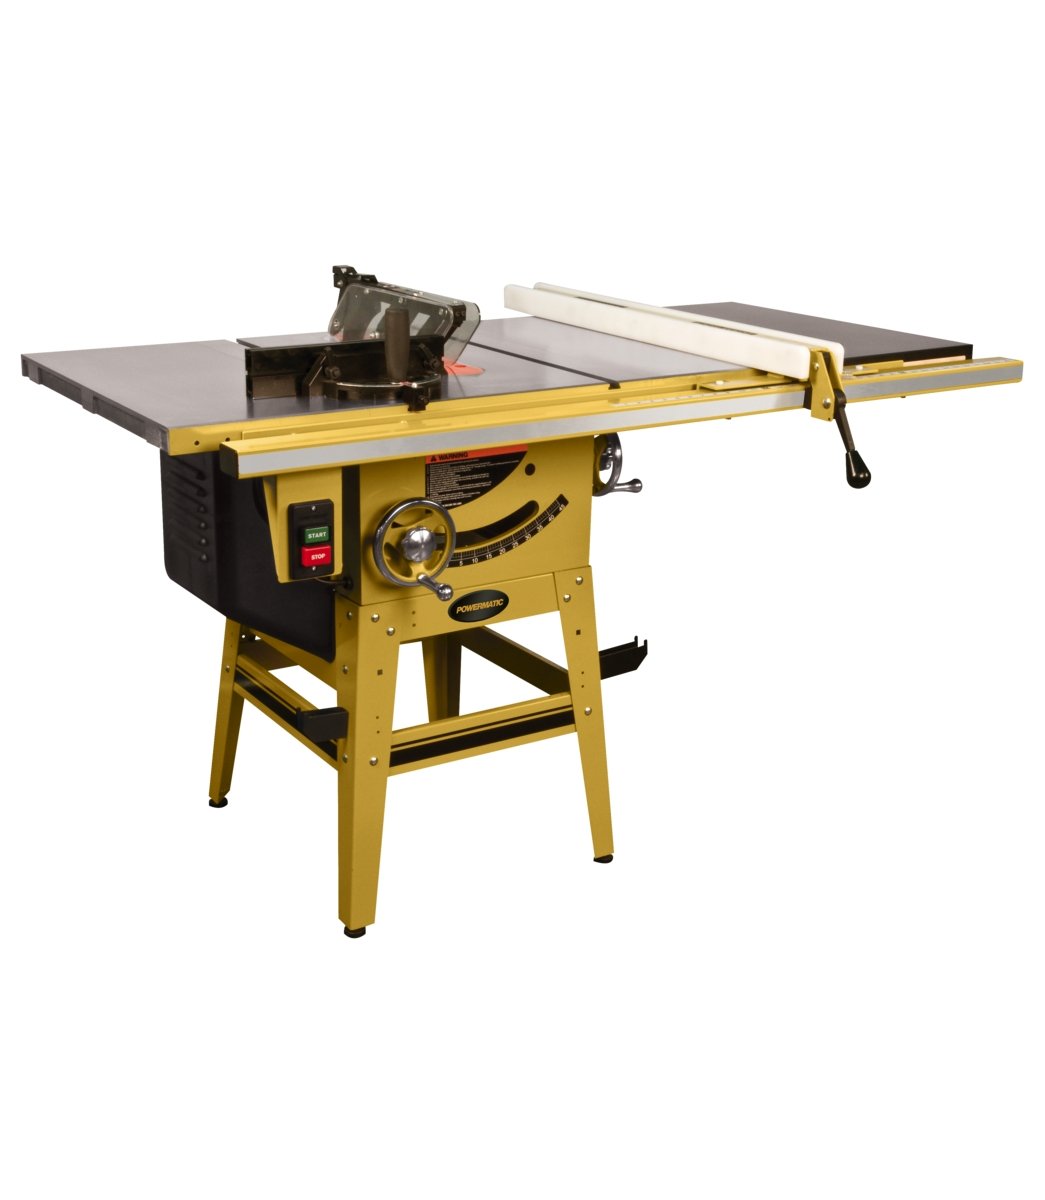 Powermatic 64B, 1.75 HP 115/230V, 30" Fence with Riving Knife | Table Saw | Hamilton Lee Supply